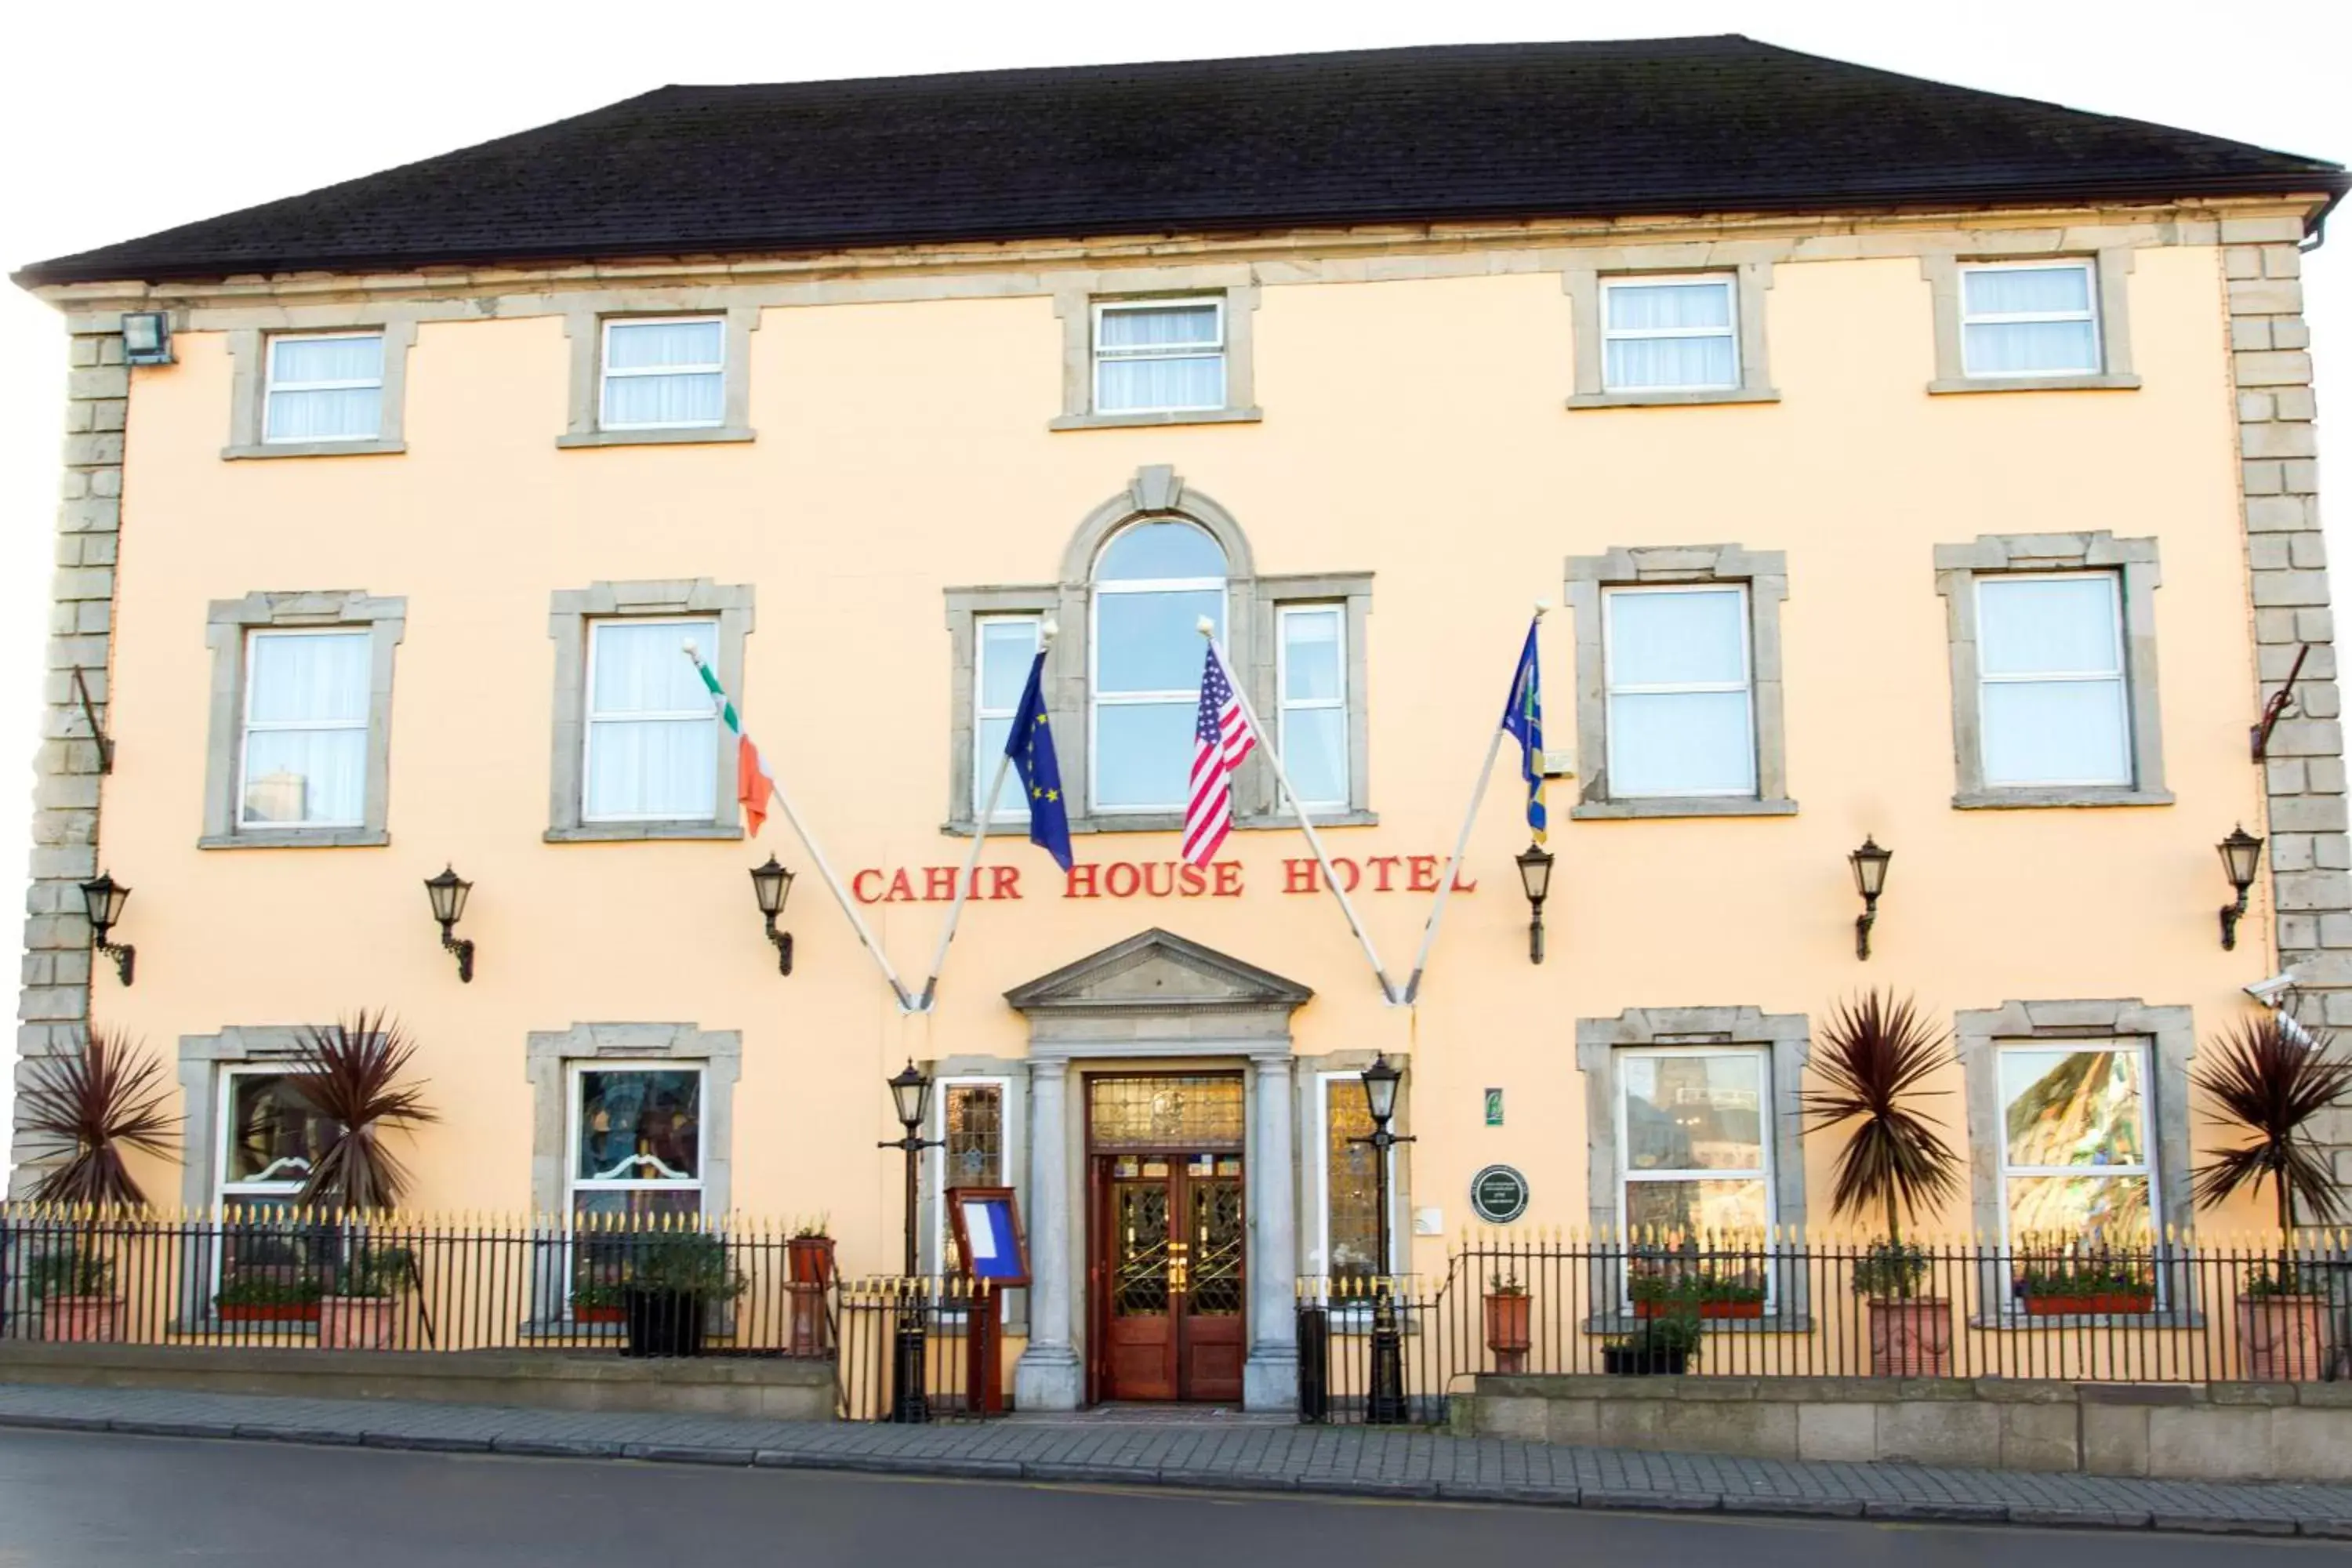 Property building in Cahir House Hotel